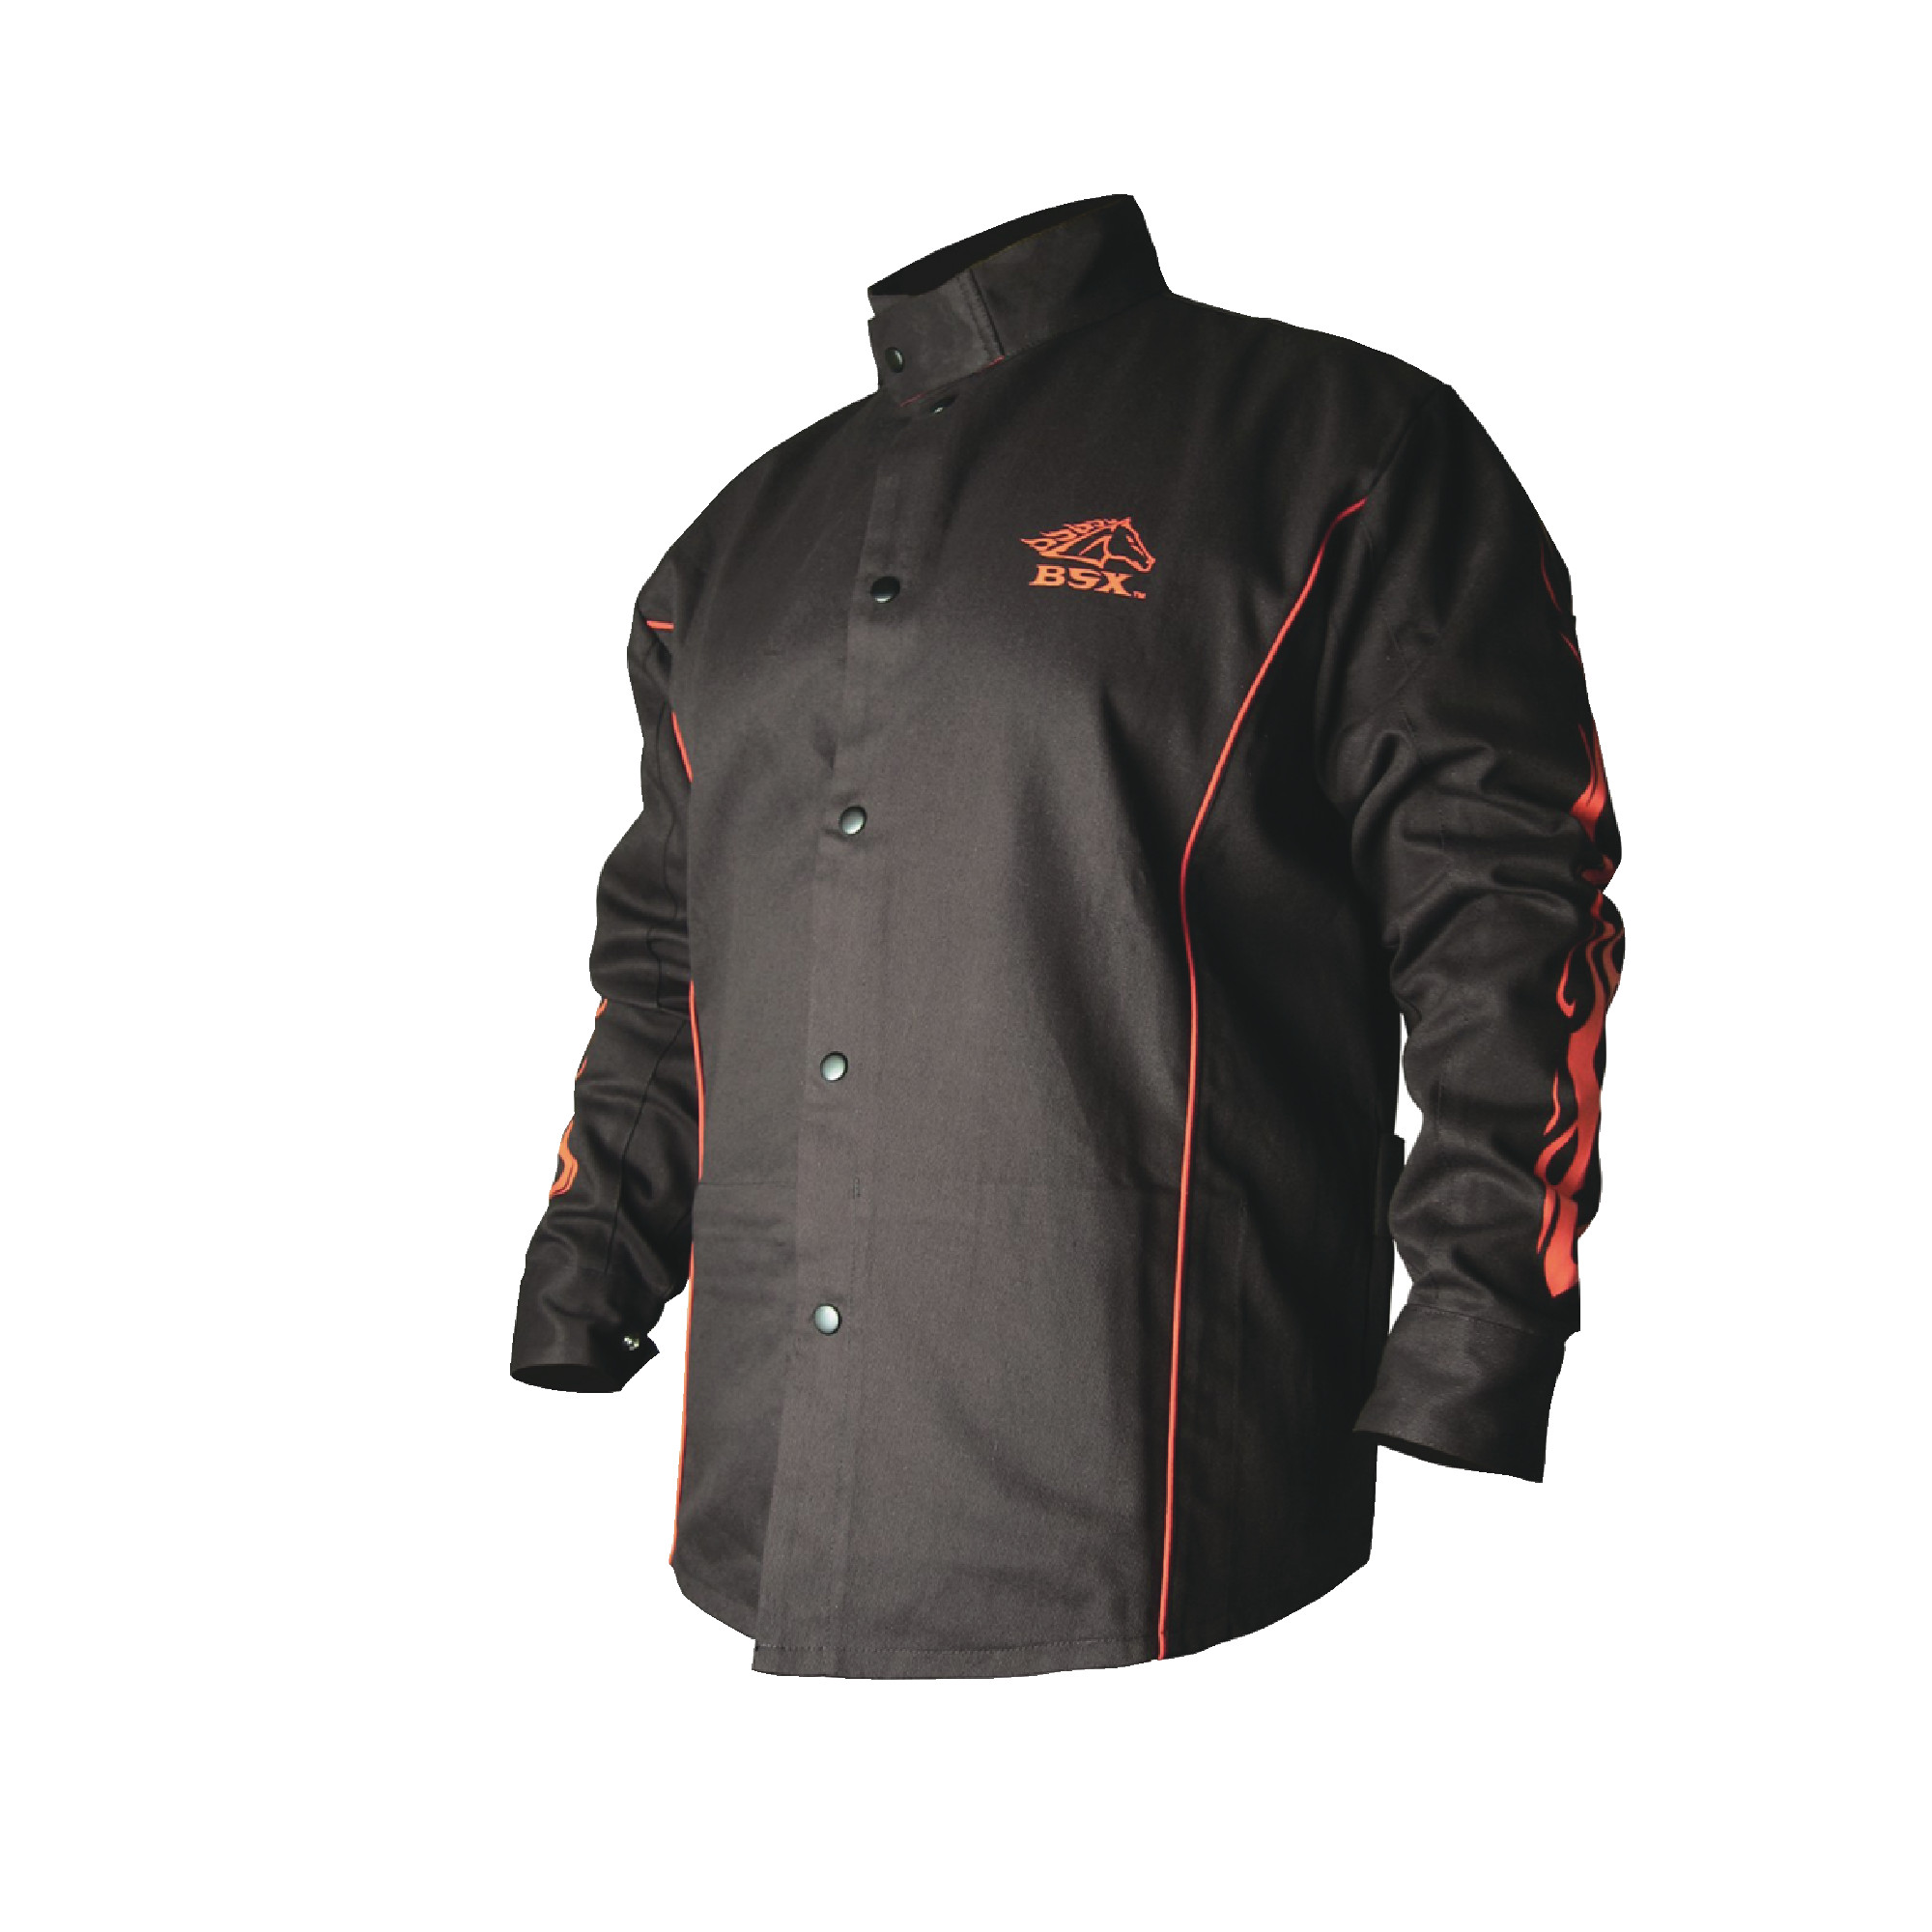 BSX Stryker Black With Red Flames Fire Resistant Welding Jacket - Size XL